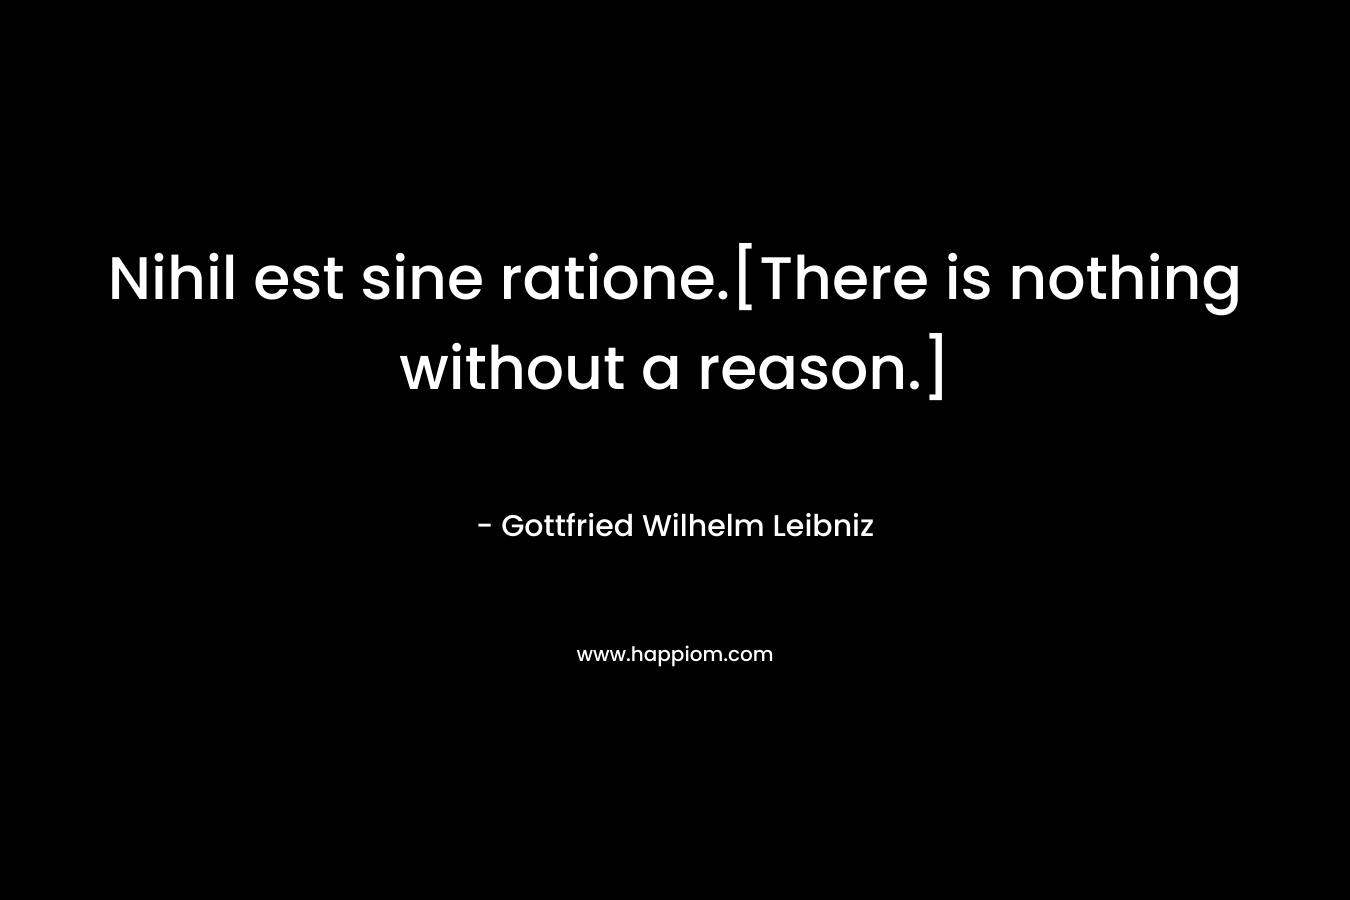 Nihil est sine ratione.[There is nothing without a reason.]